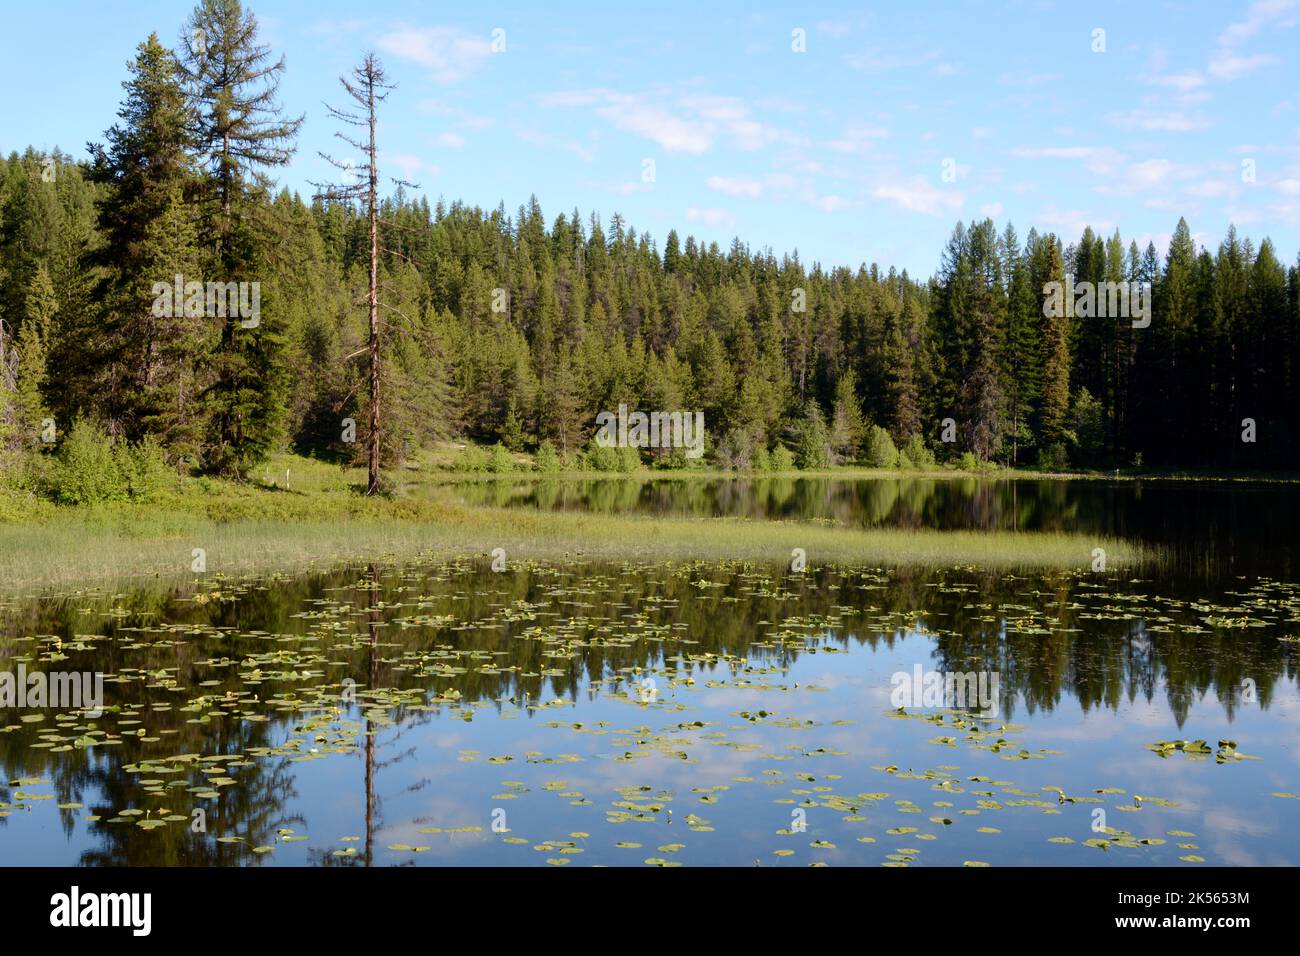 A large pond in the Little Pend Oreille National Wildlife Refuge near the town of Colville in northeastern Washington State, USA. Stock Photo